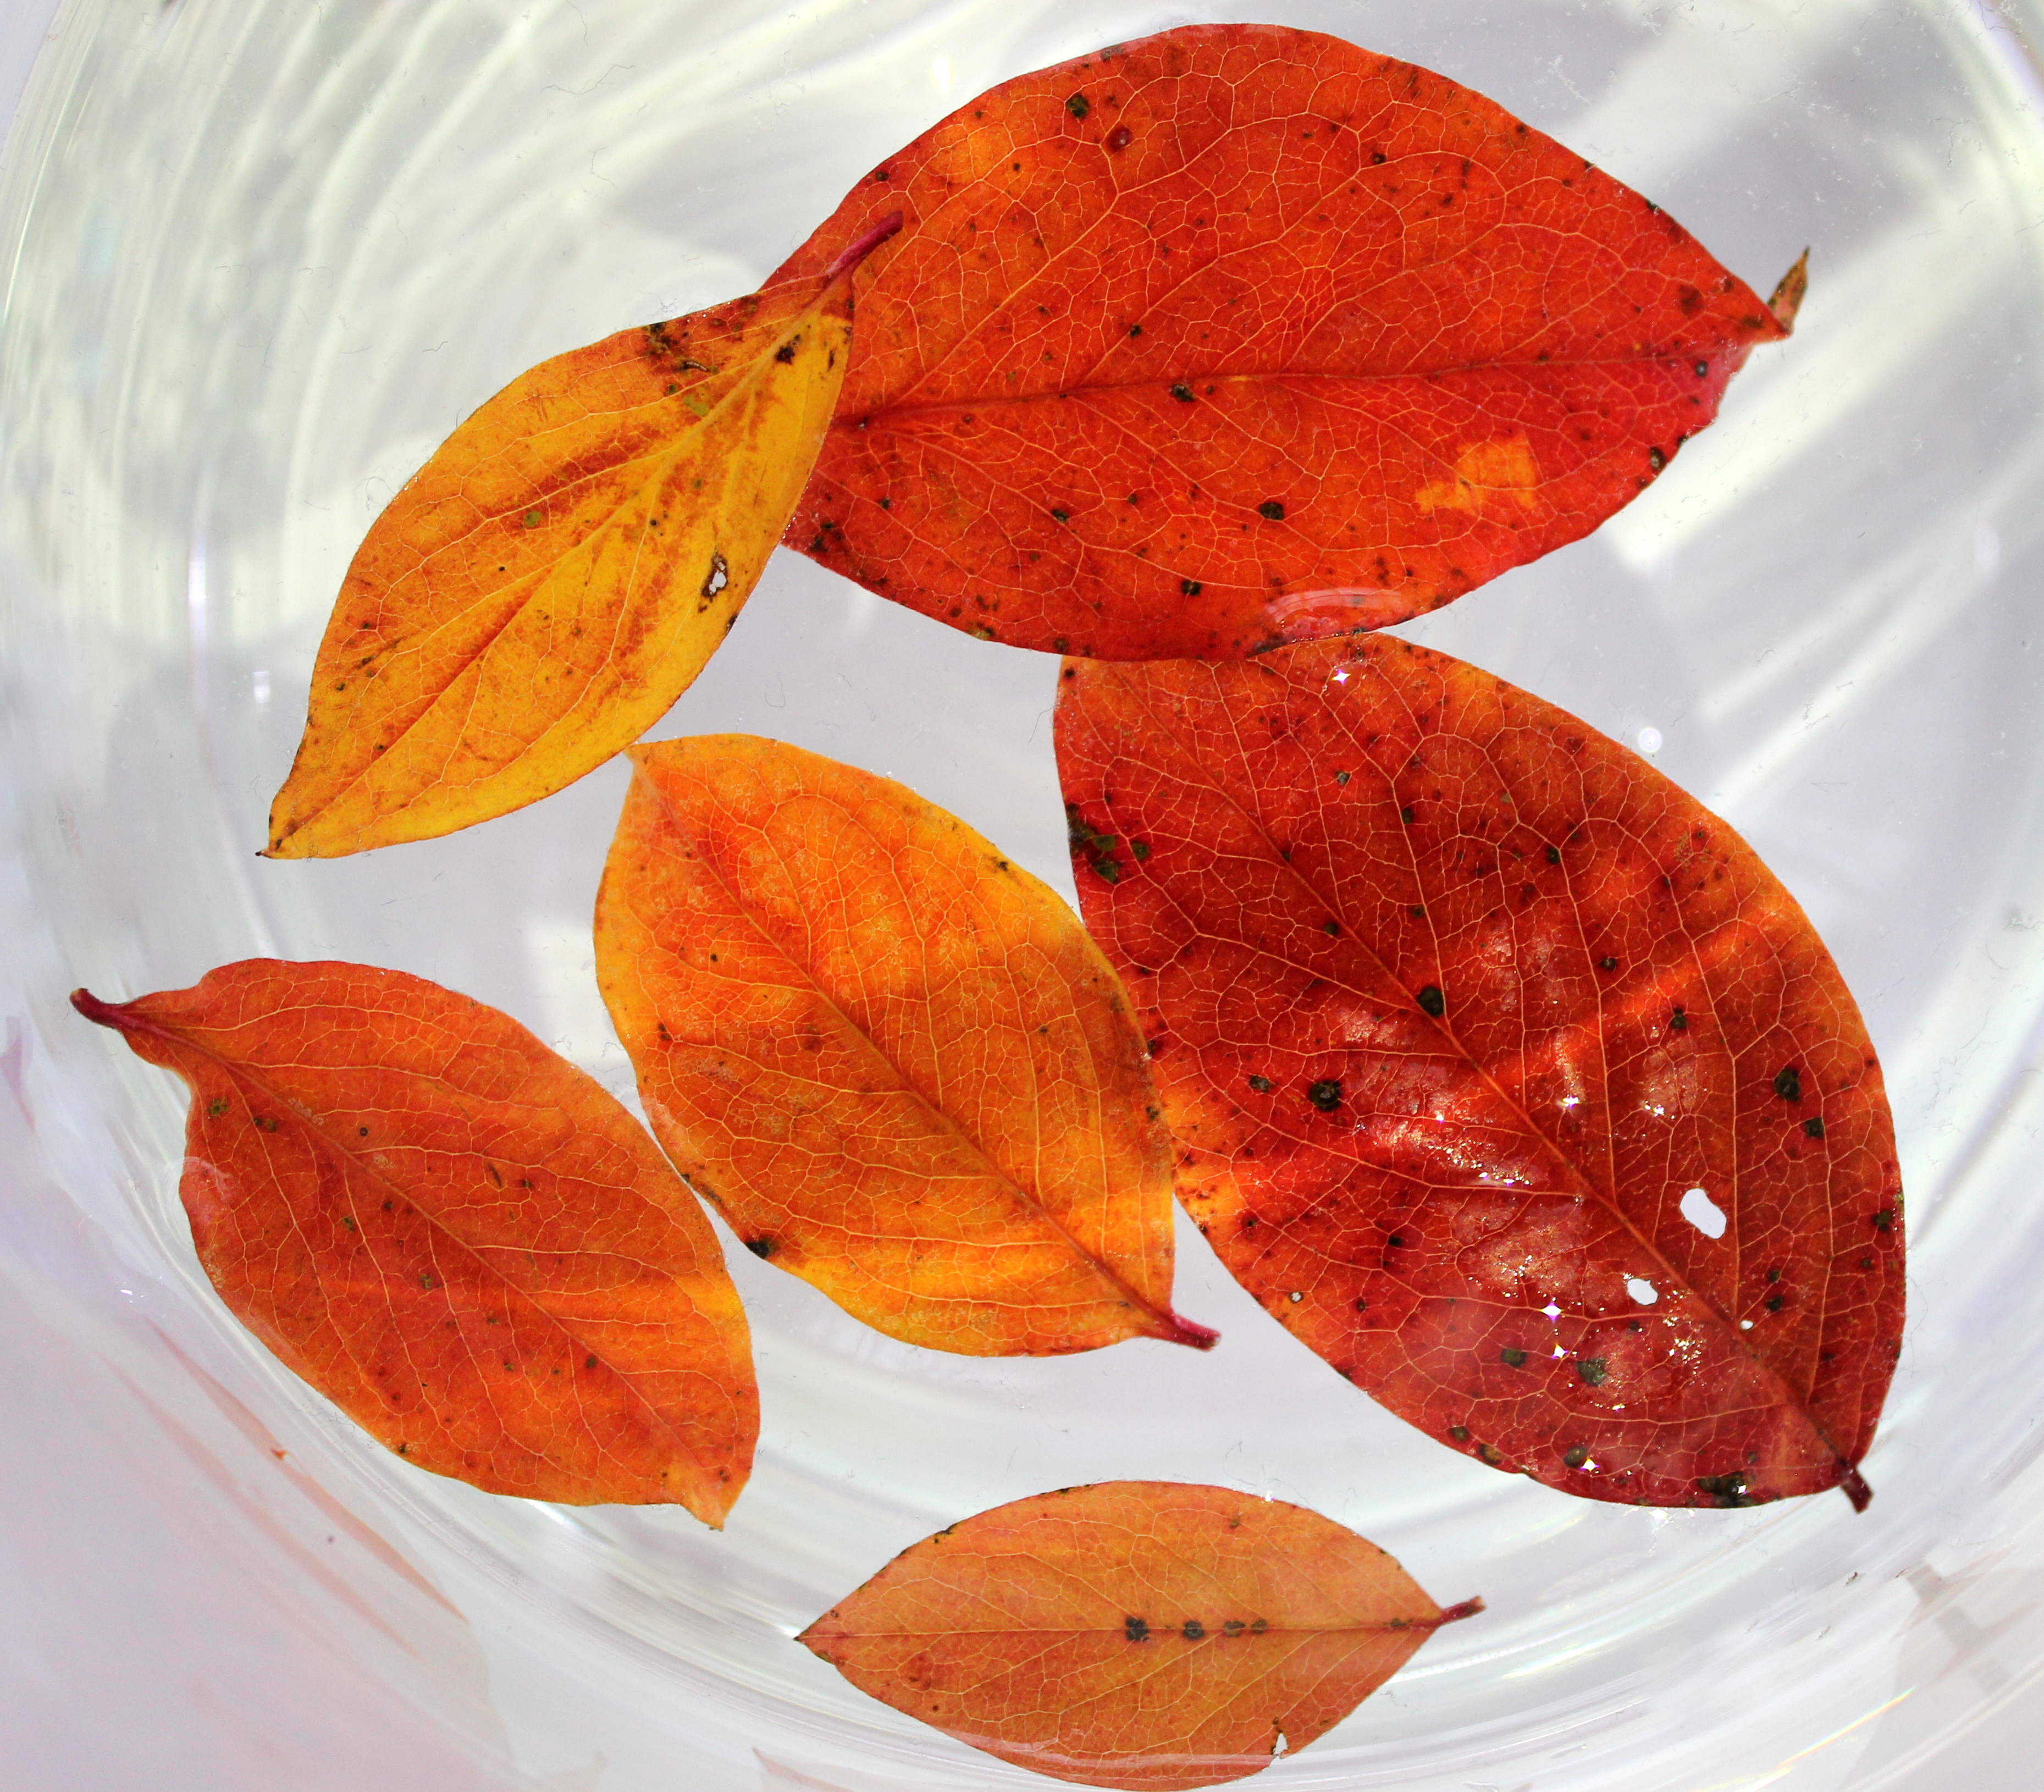 Playing with water, light and leaves (Fagus sylvatica)